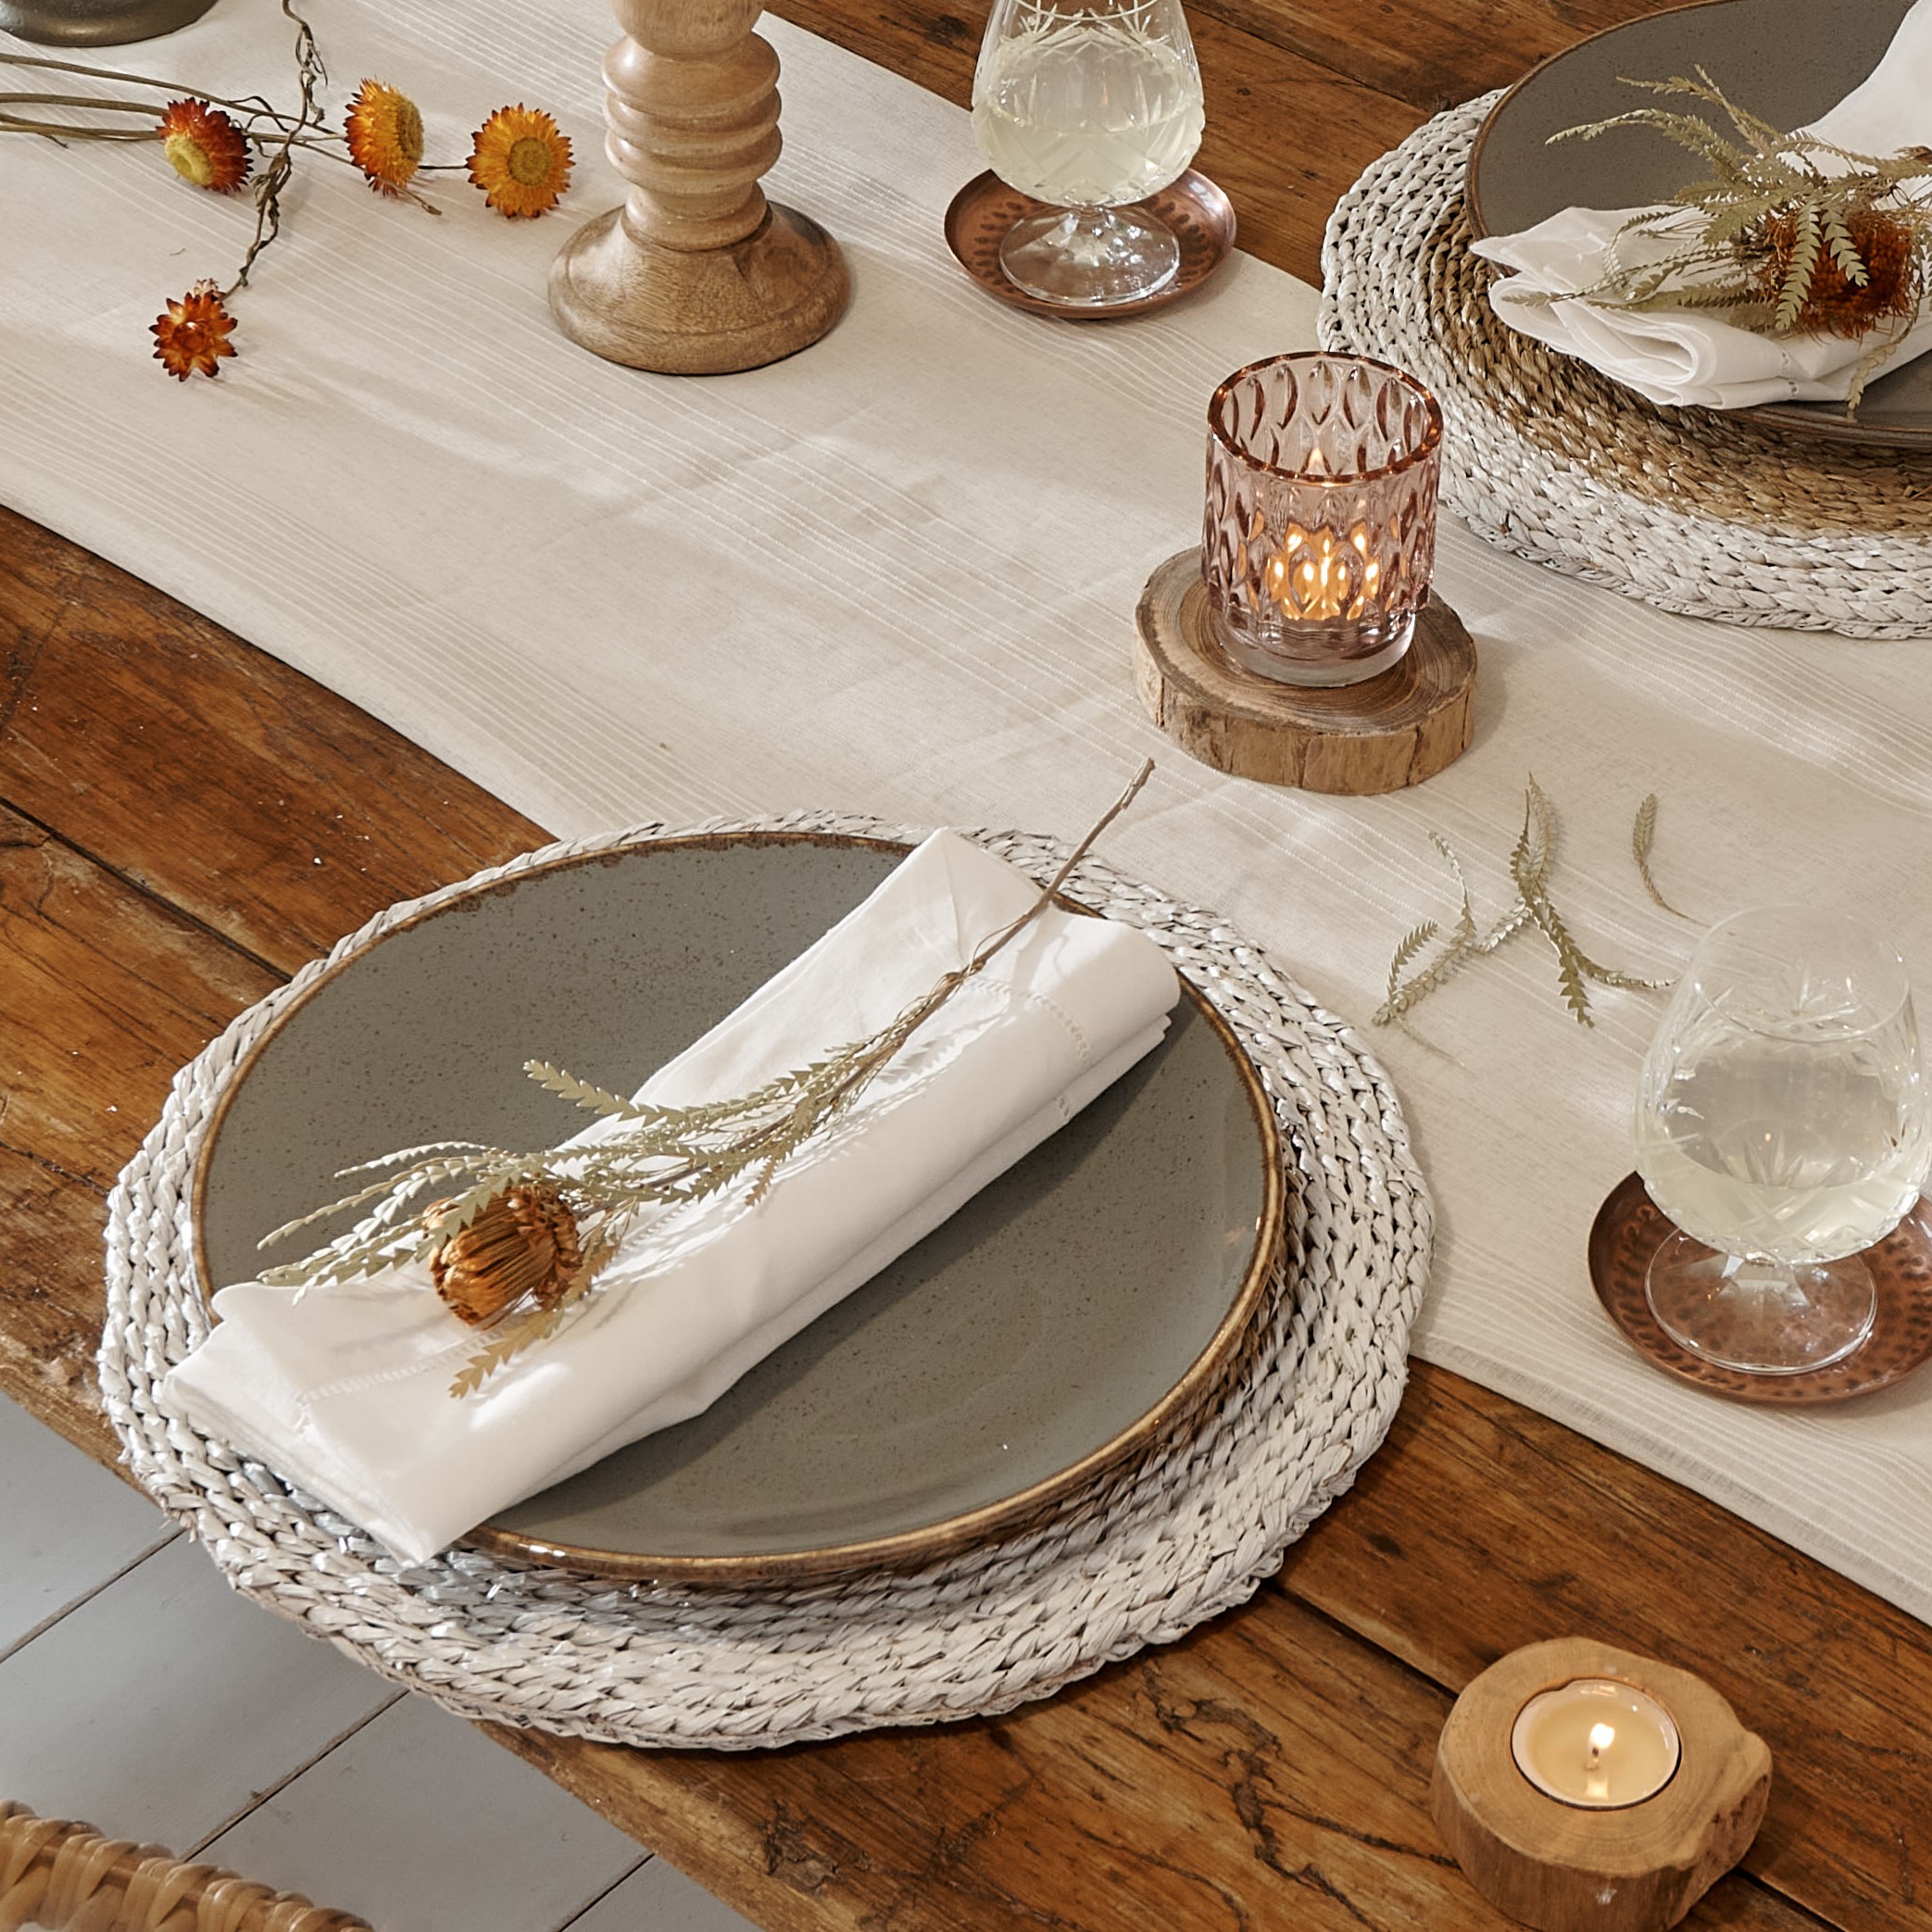 White wicker placemat on wooden table with cotton runner, with wooden and glass candlesticks, wooden and copper coasters and dried flowers